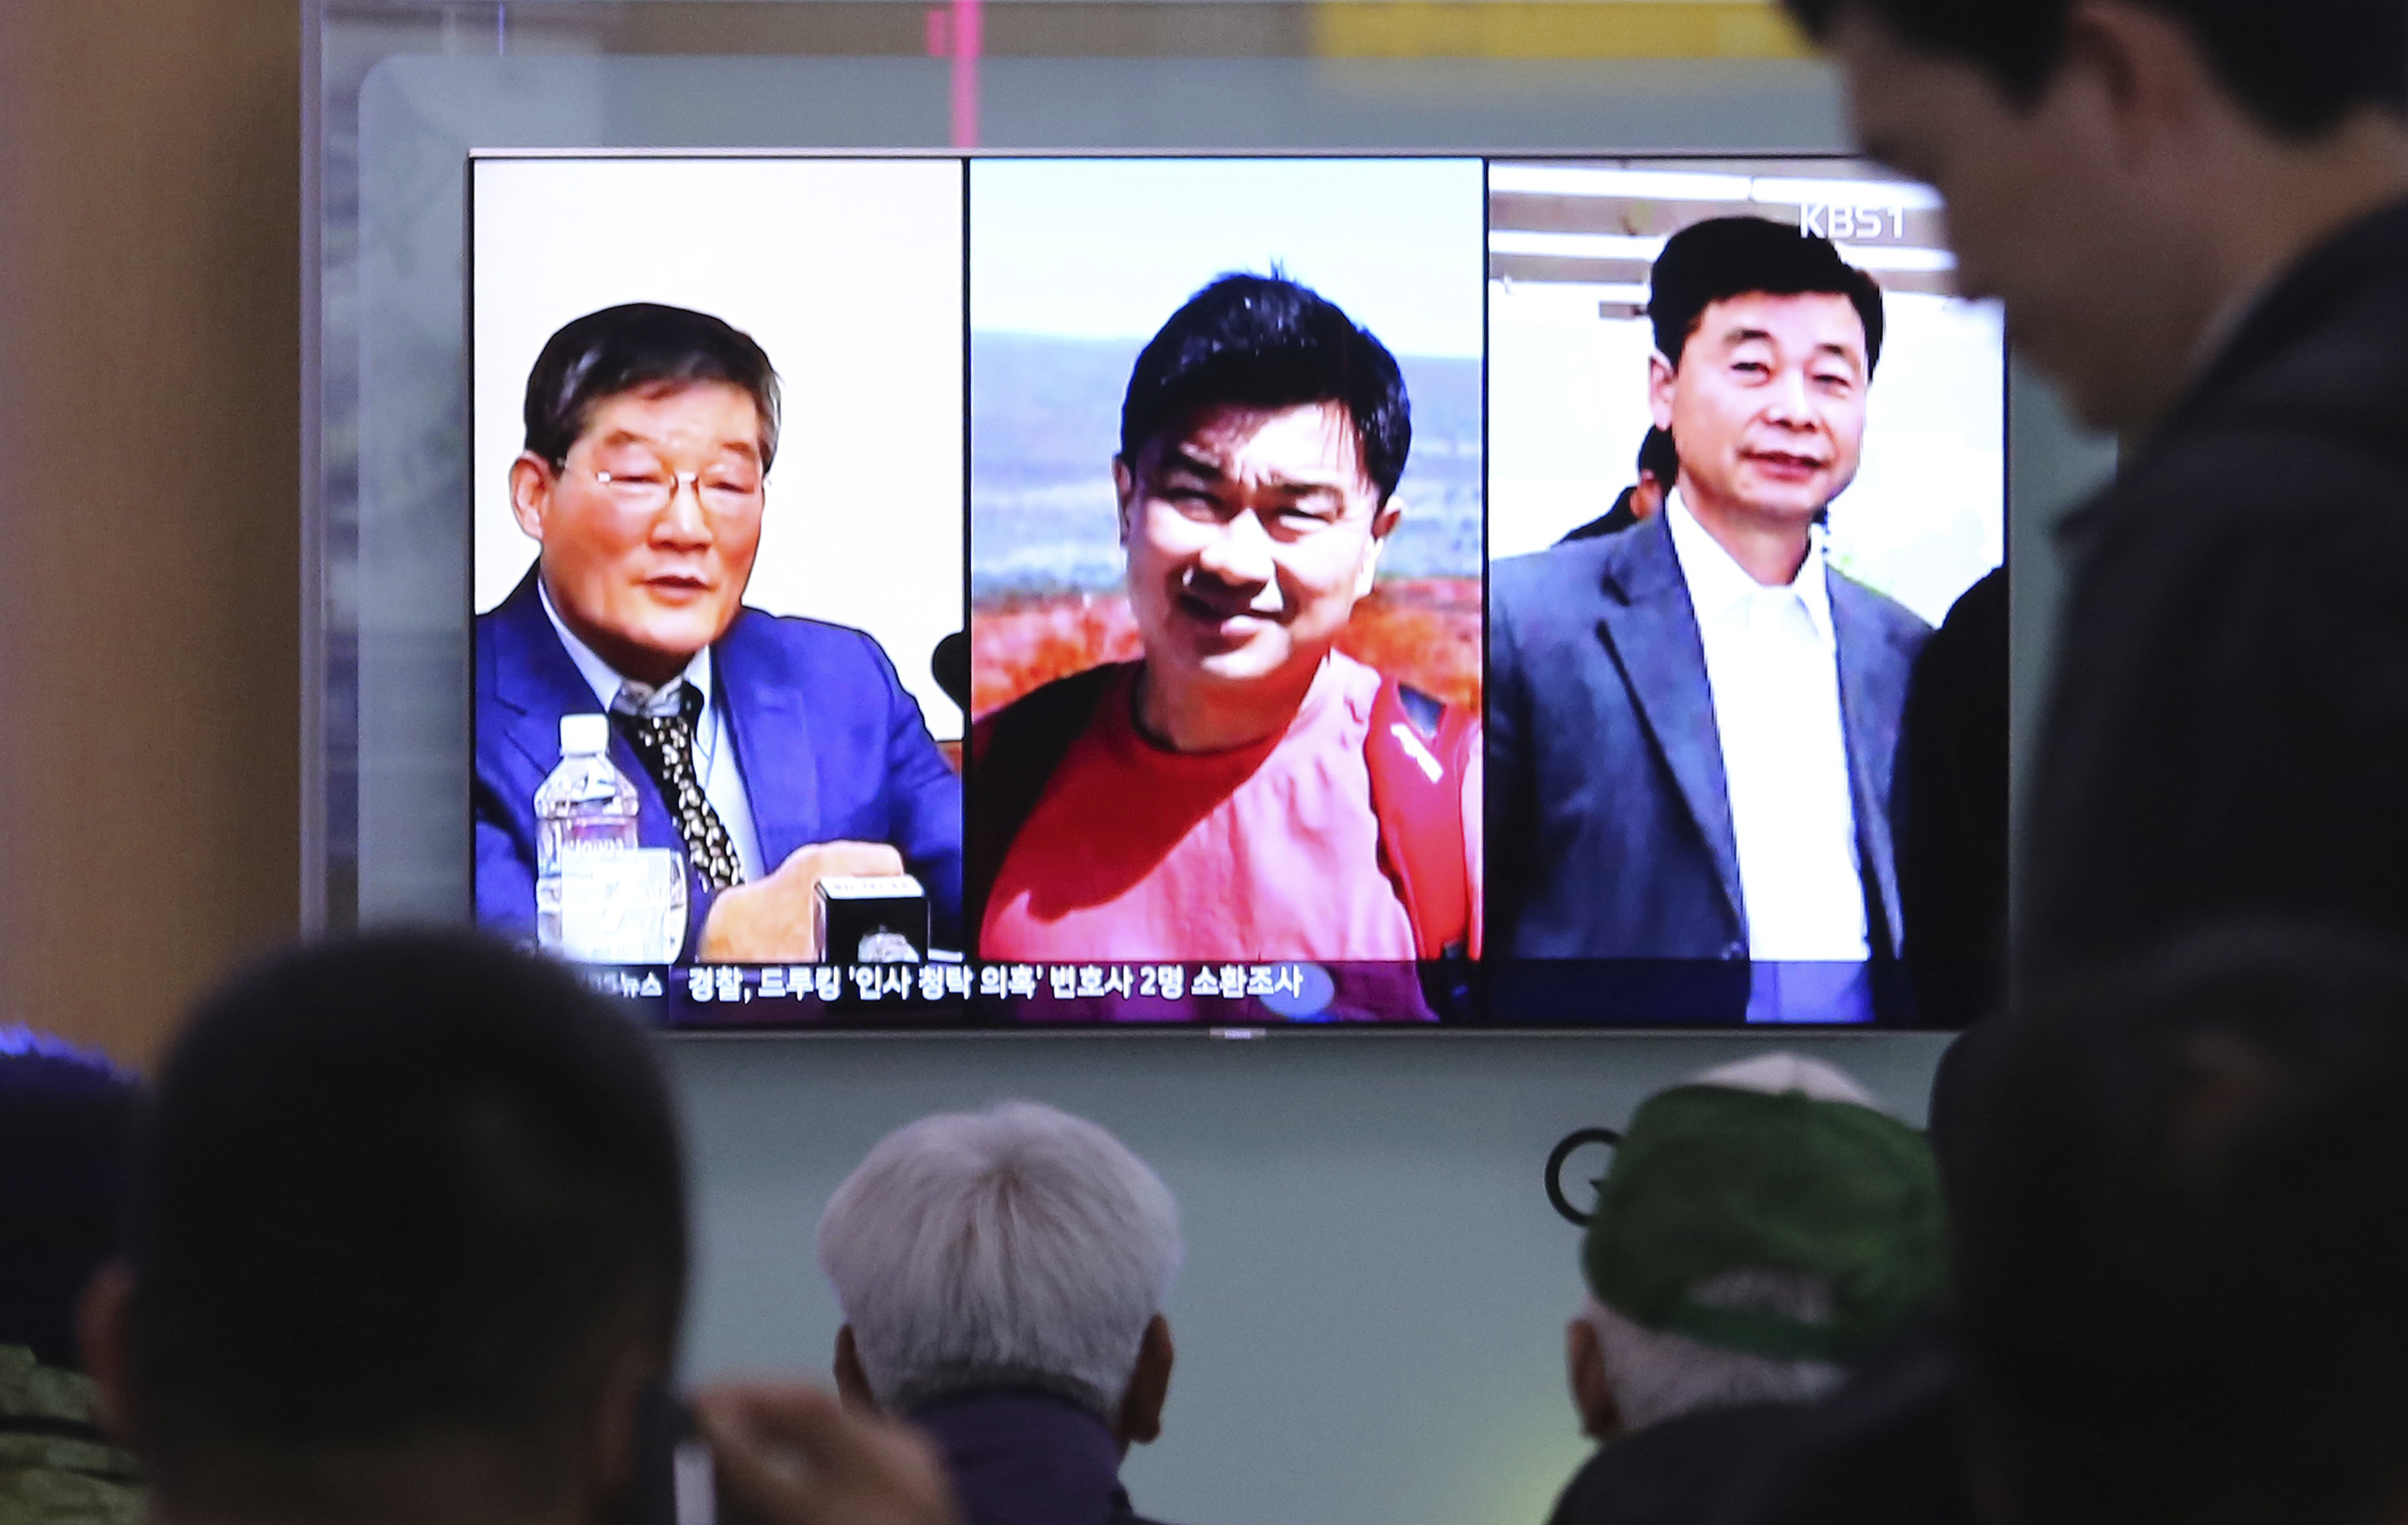 FILE - In this May 3, 2018 photo, people watch a TV news report on screen, showing portraits of three Americans, Kim Dong Chul, left, Tony Kim and Kim Hak Song, right, detained in the North Korea, at the Seoul Railway Station in Seoul, South Korea. President Donald Trump says Secretary of State Mike Pompeo is on his way back from North Korea with three American detainees, saying they "seem to be in good health." (AP Photo/Ahn Young-joon) (Ahn Young-joon—AP)